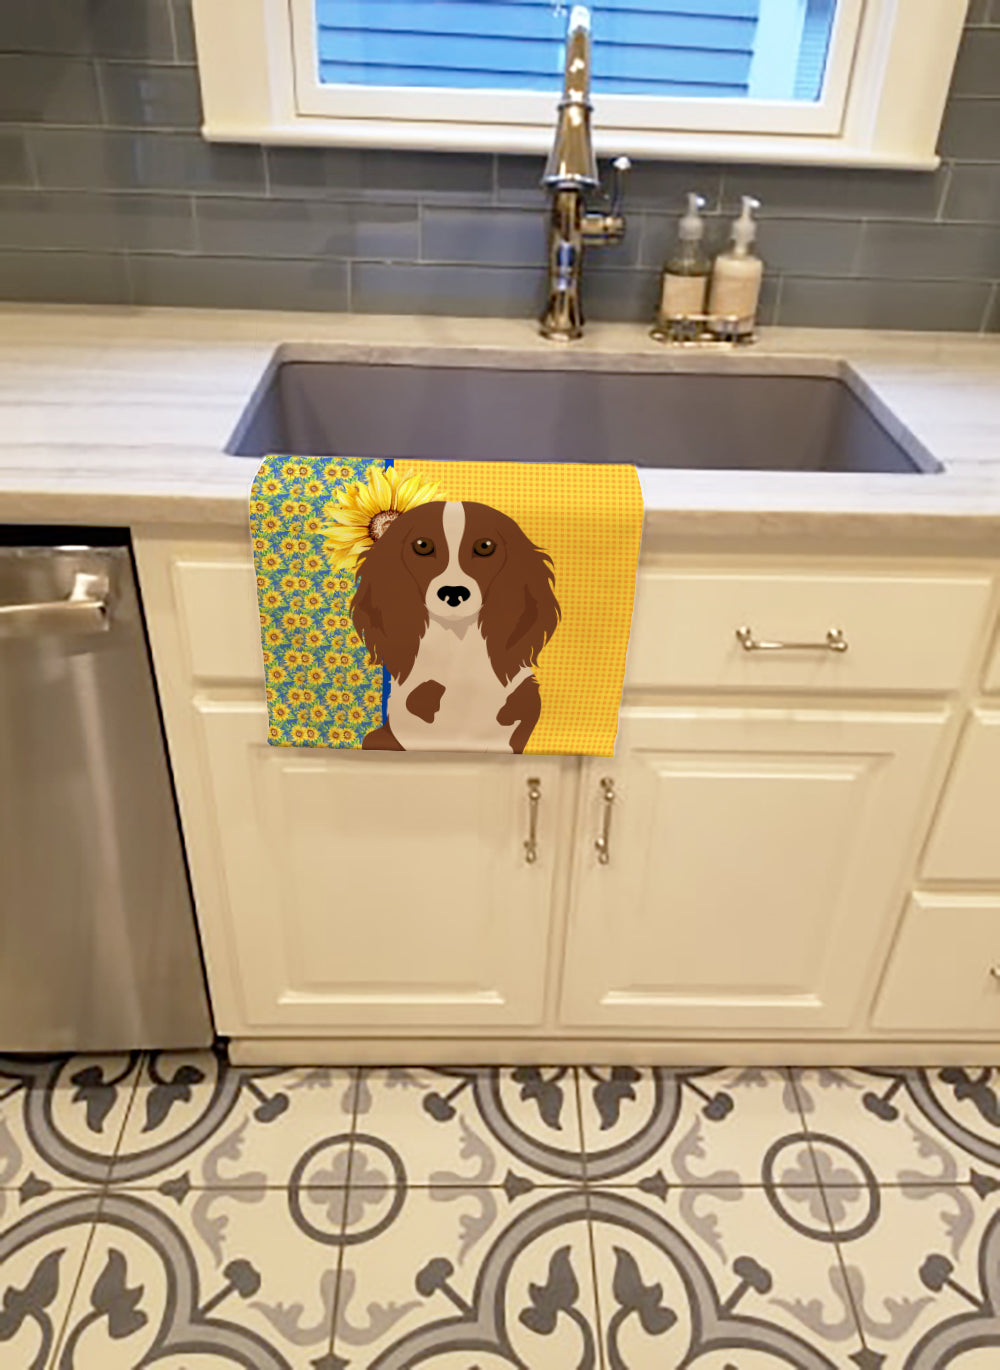 Summer Sunflowers Longhair Red Pedbald Dachshund Kitchen Towel - the-store.com